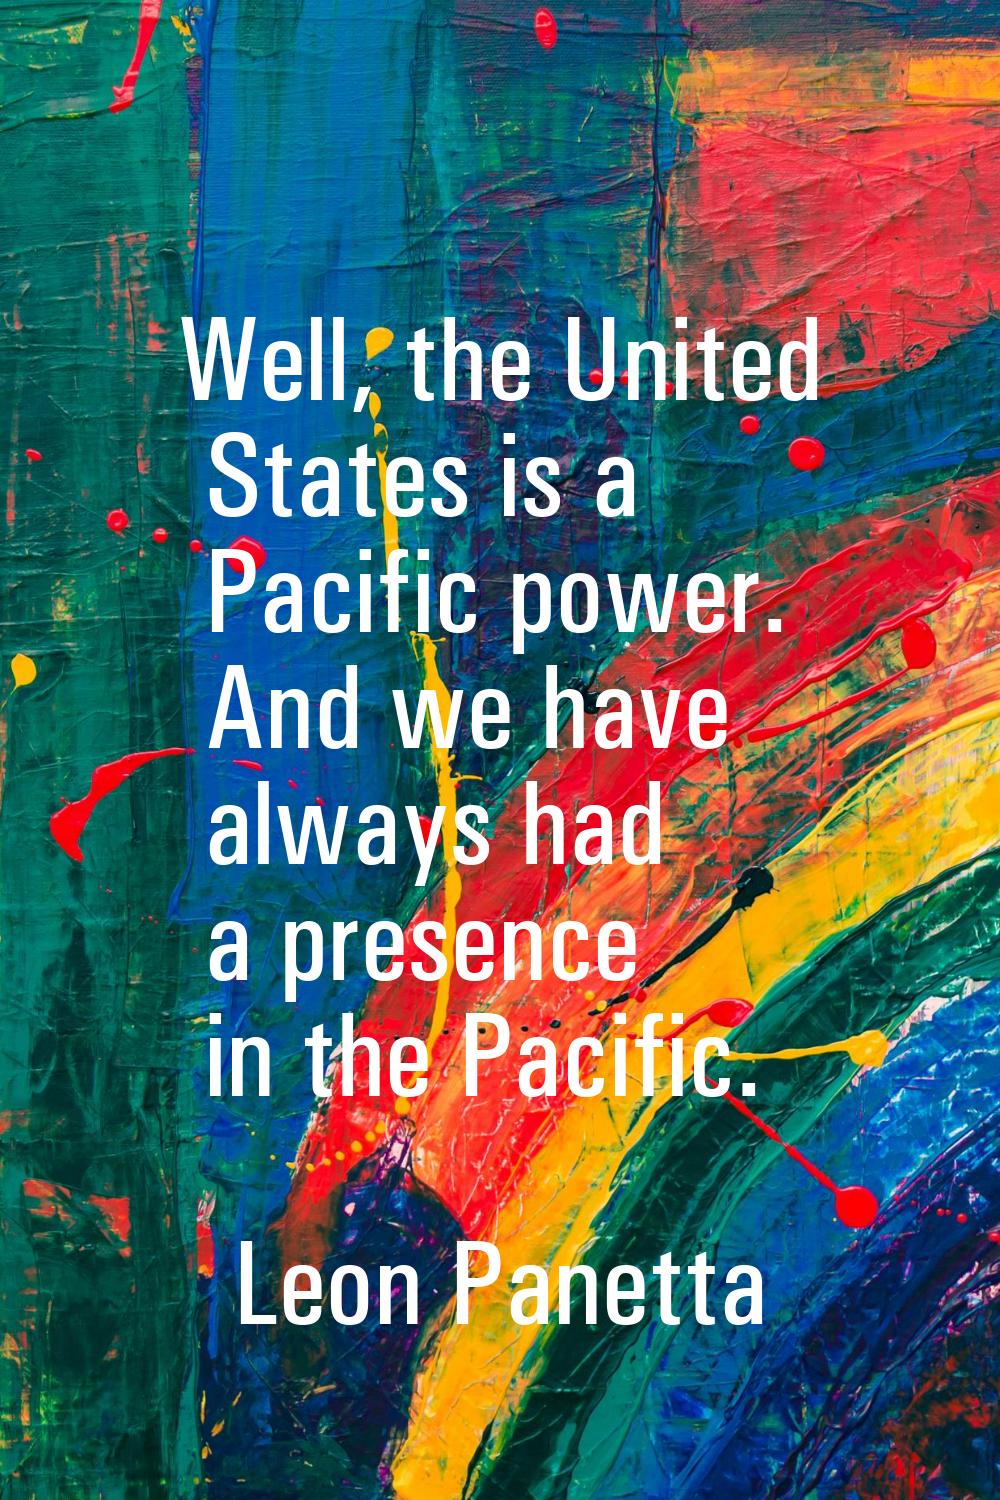 Well, the United States is a Pacific power. And we have always had a presence in the Pacific.